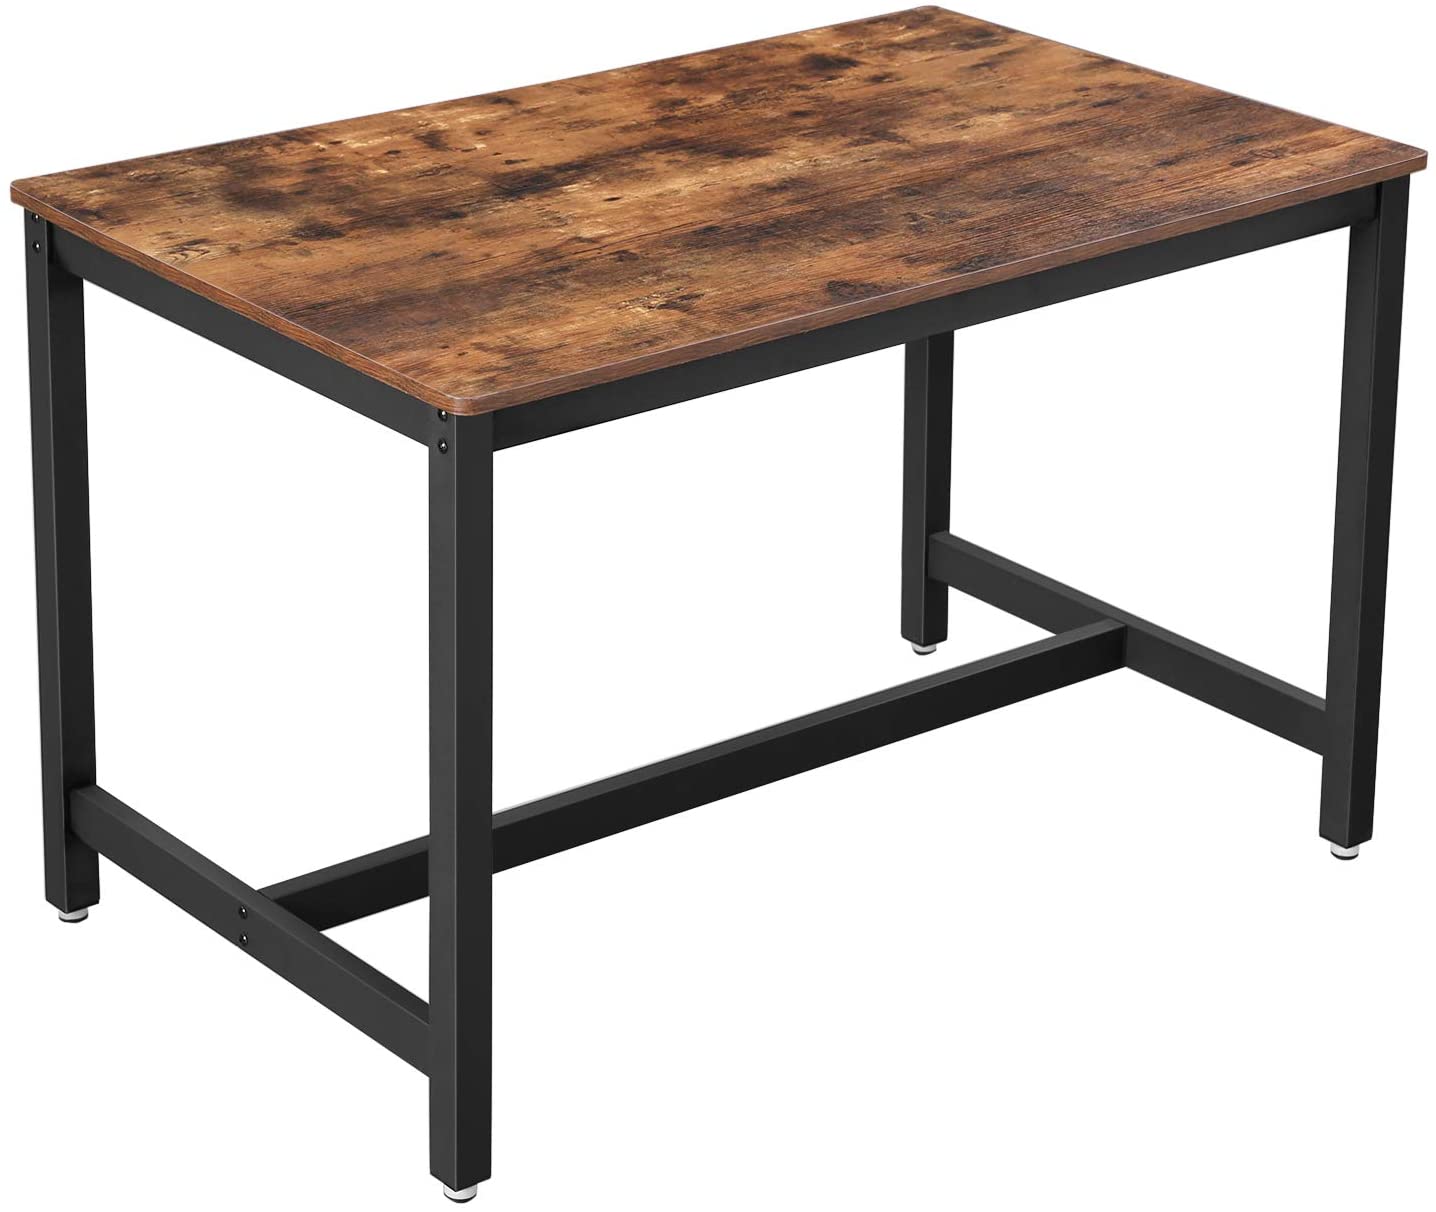 B07V9BXFHY VASAGLE ALINRU Dining Table for 4 People, Kitchen Table, 47.2 x 29.5 x 29.5 Inches, Heavy Duty Metal Frame, Industrial Style, for Living Room, Dining Room, Rustic Brown UKDT75X